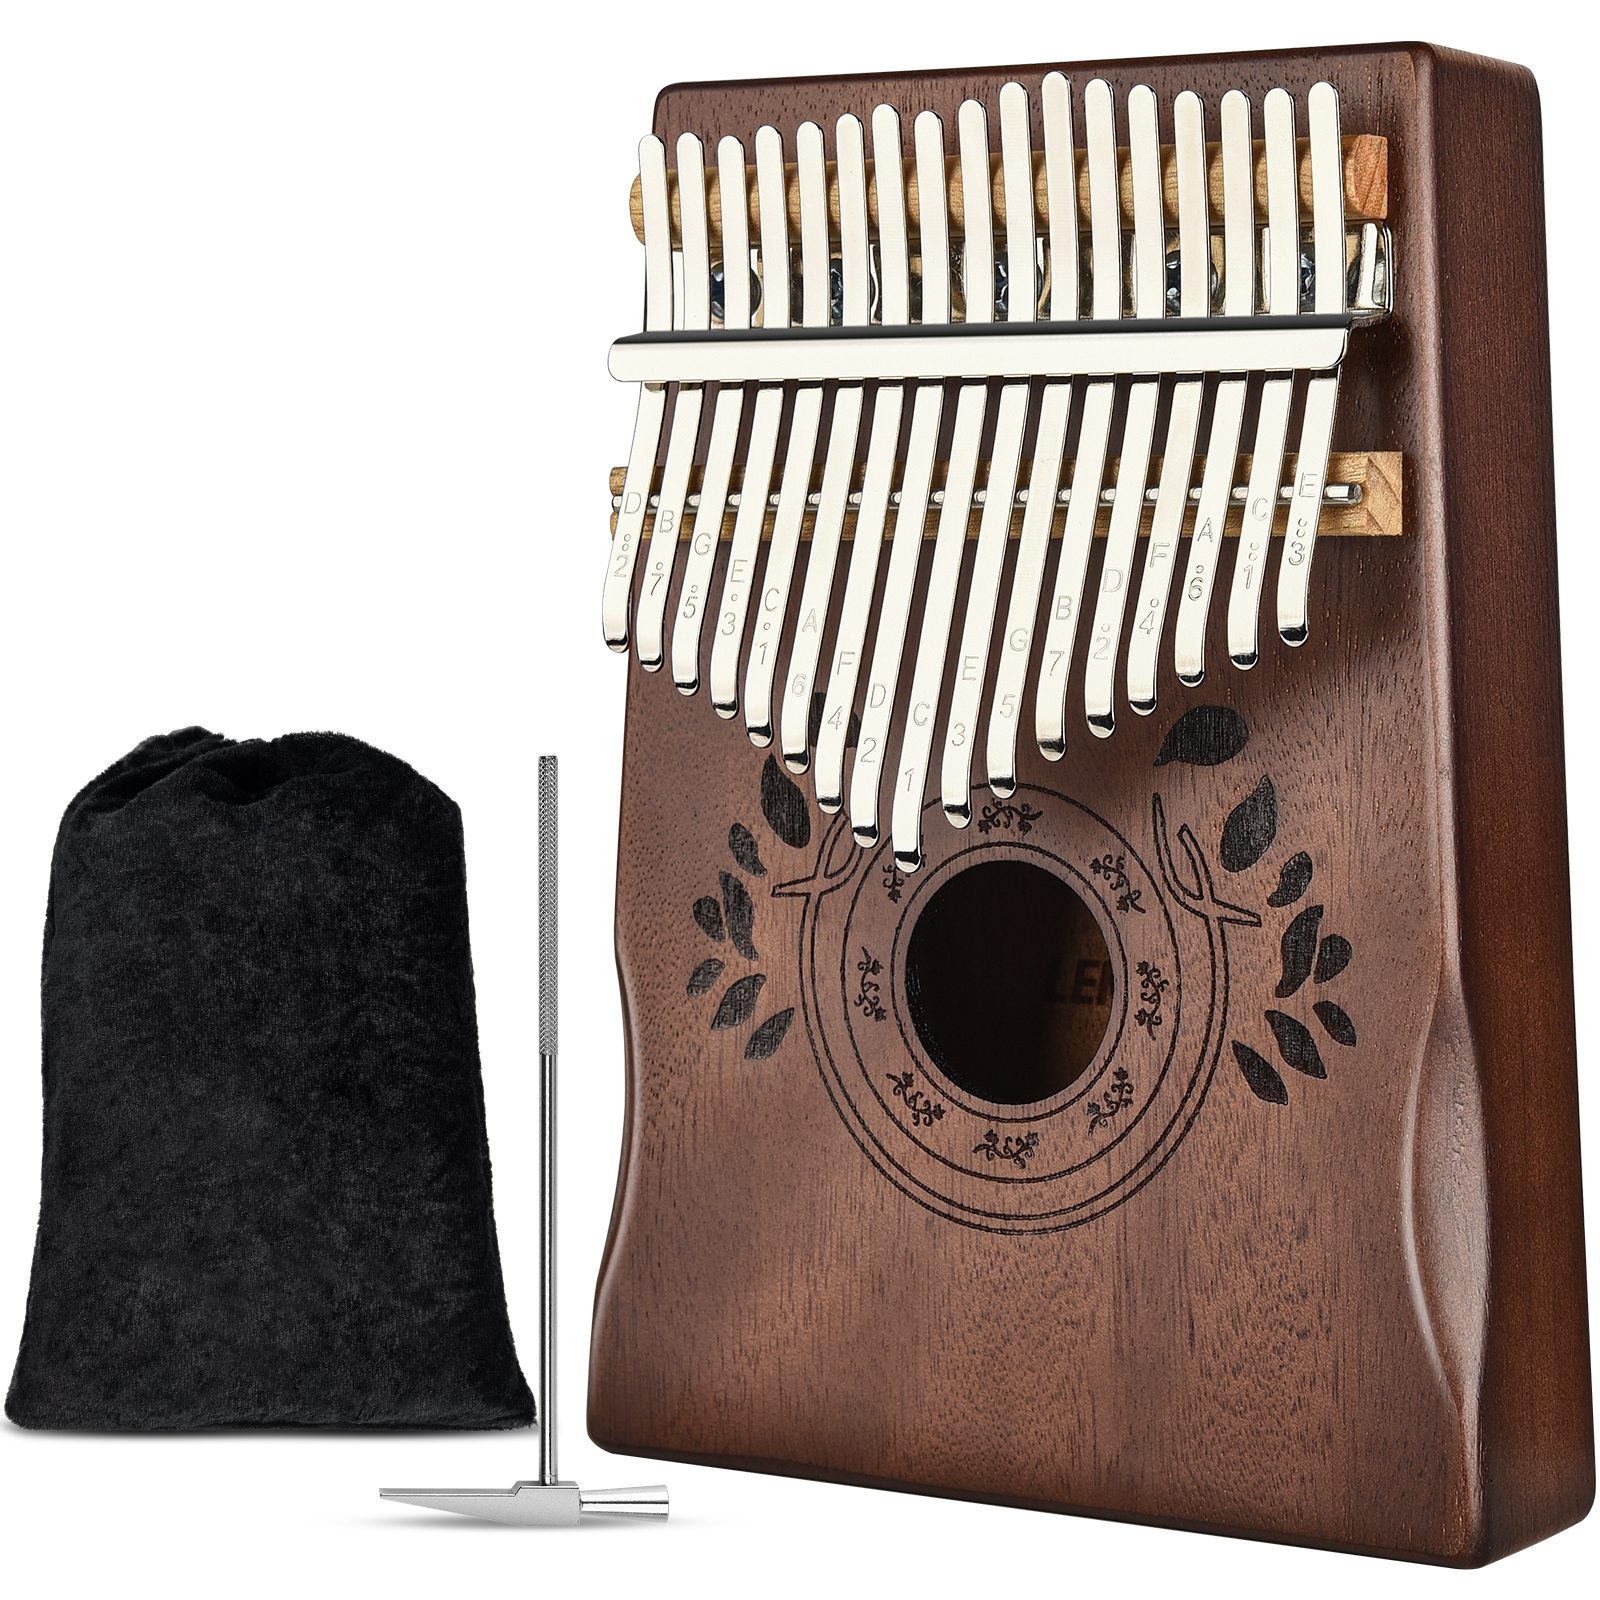 [kit complet] kalimba feuille d'automne 17 notes